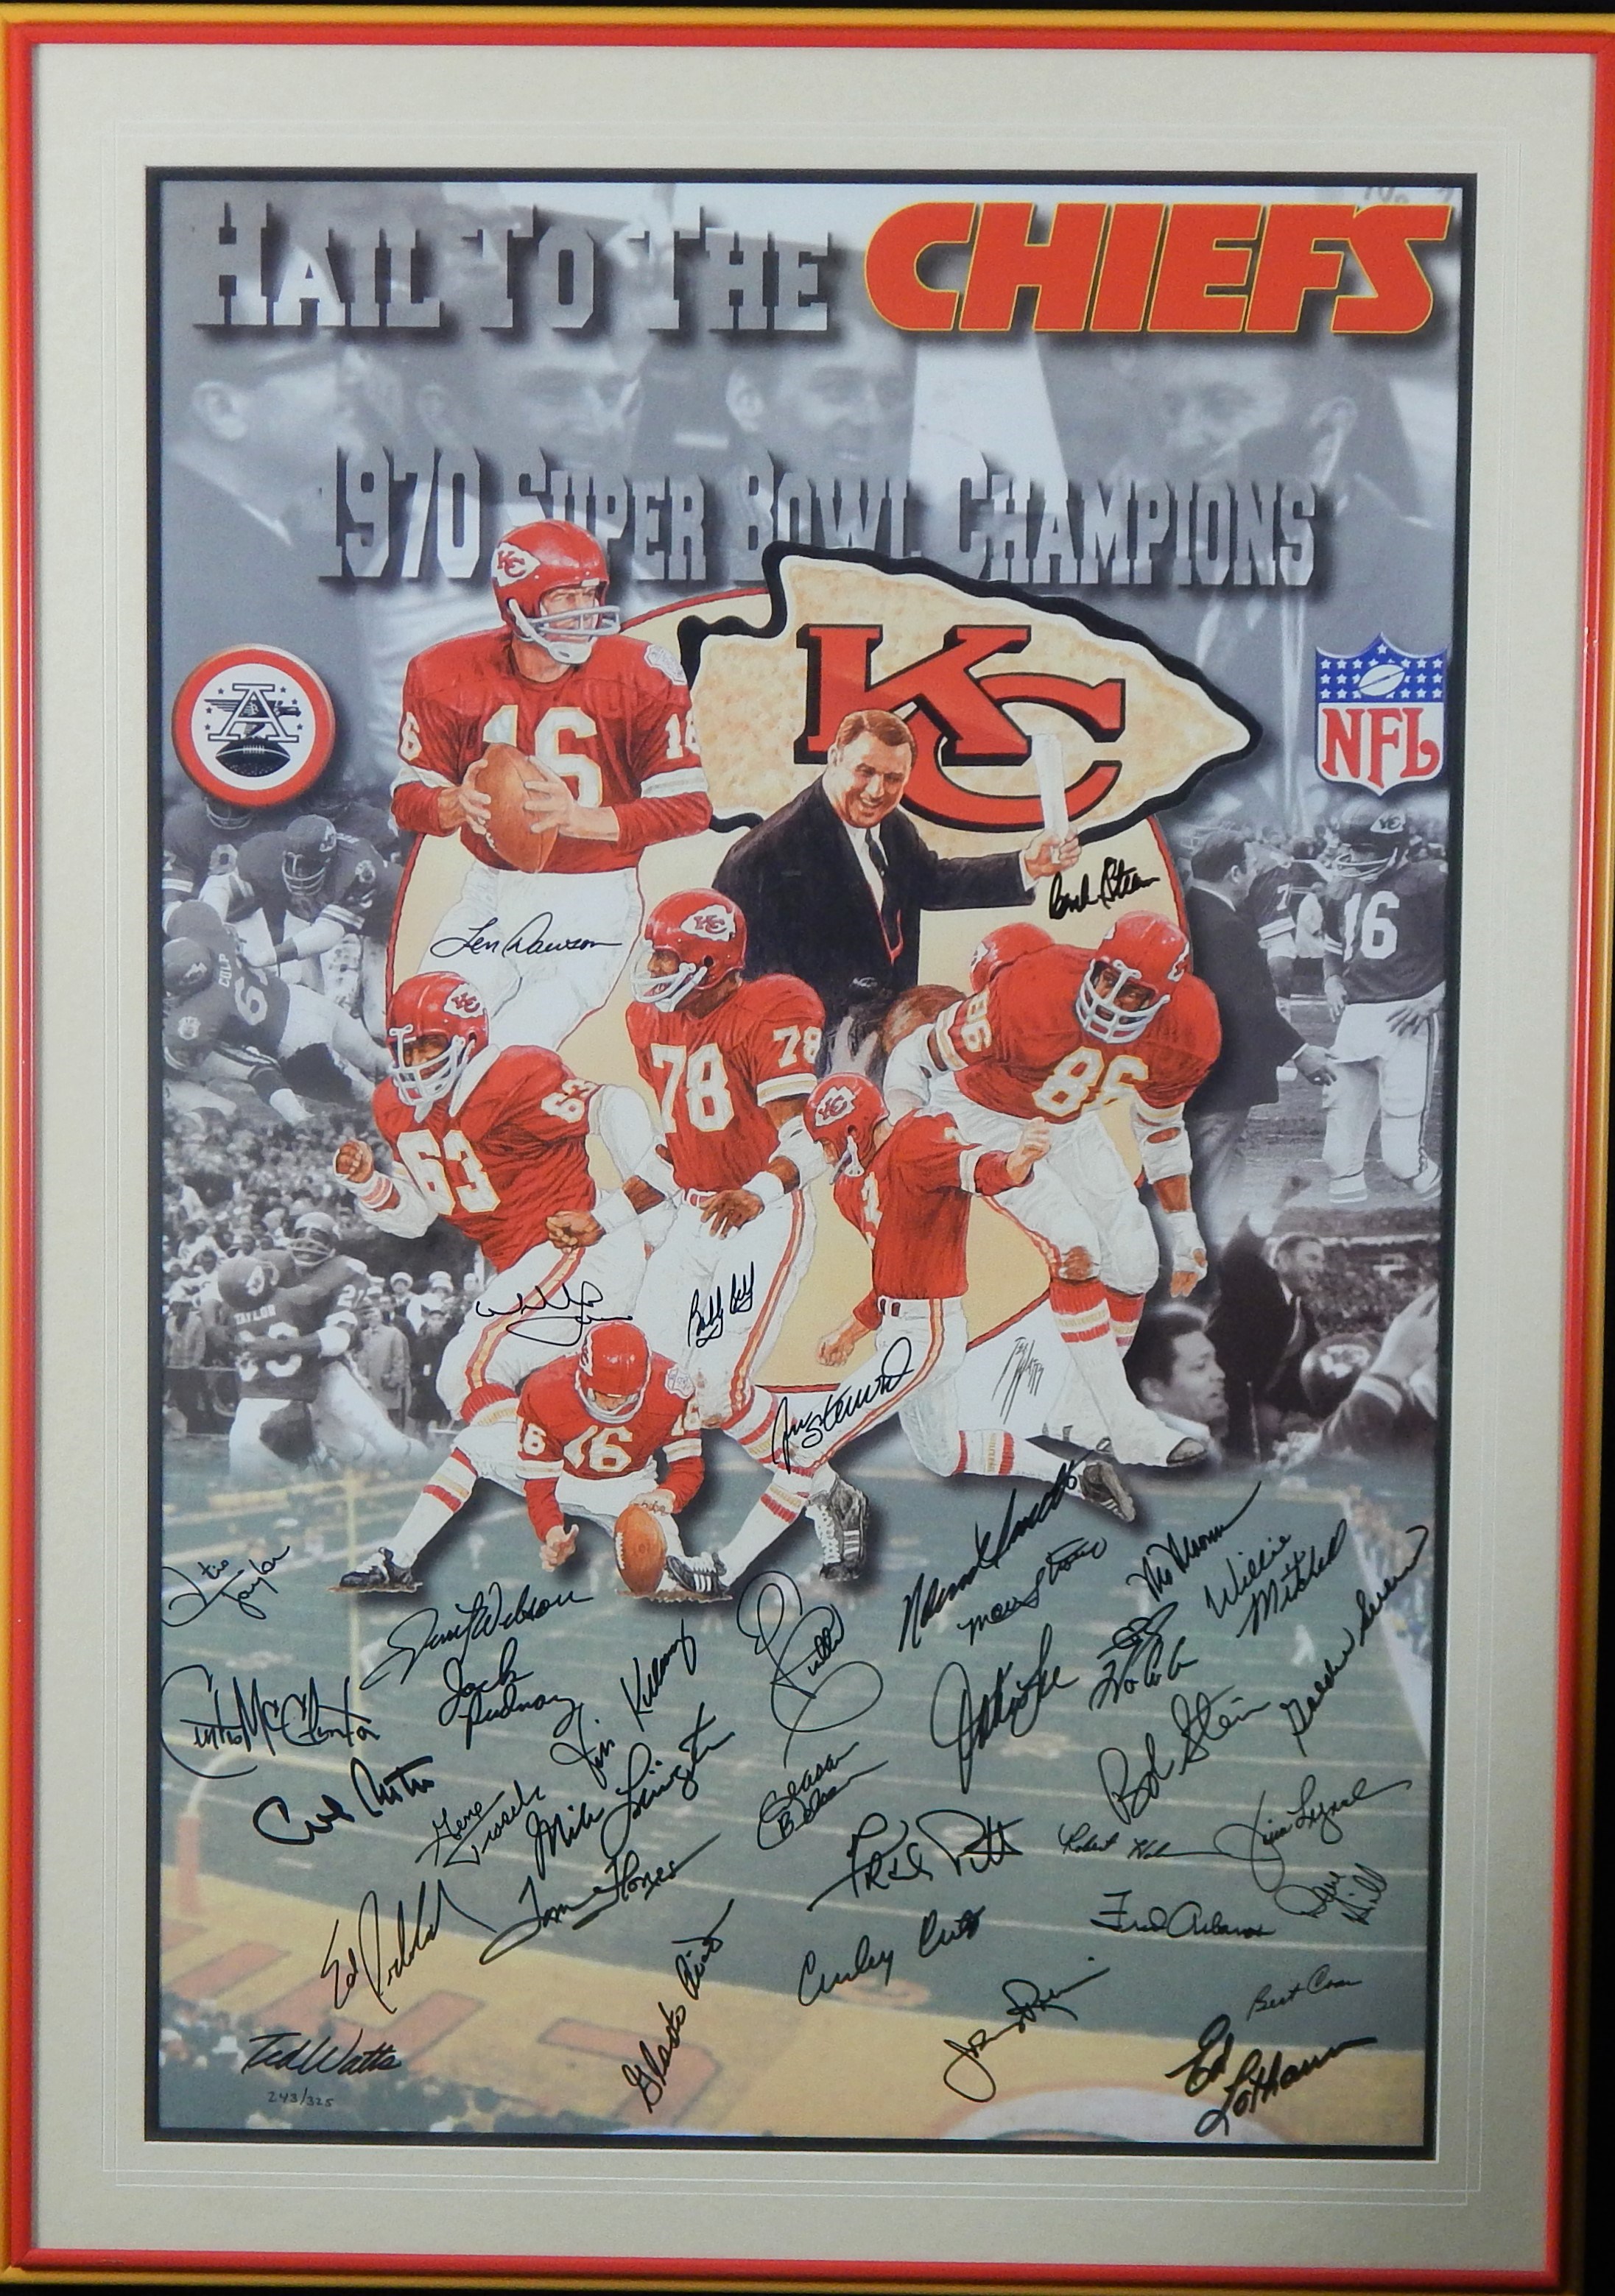 - 1970 Kansas City Chiefs Signed Limited Edition Poster